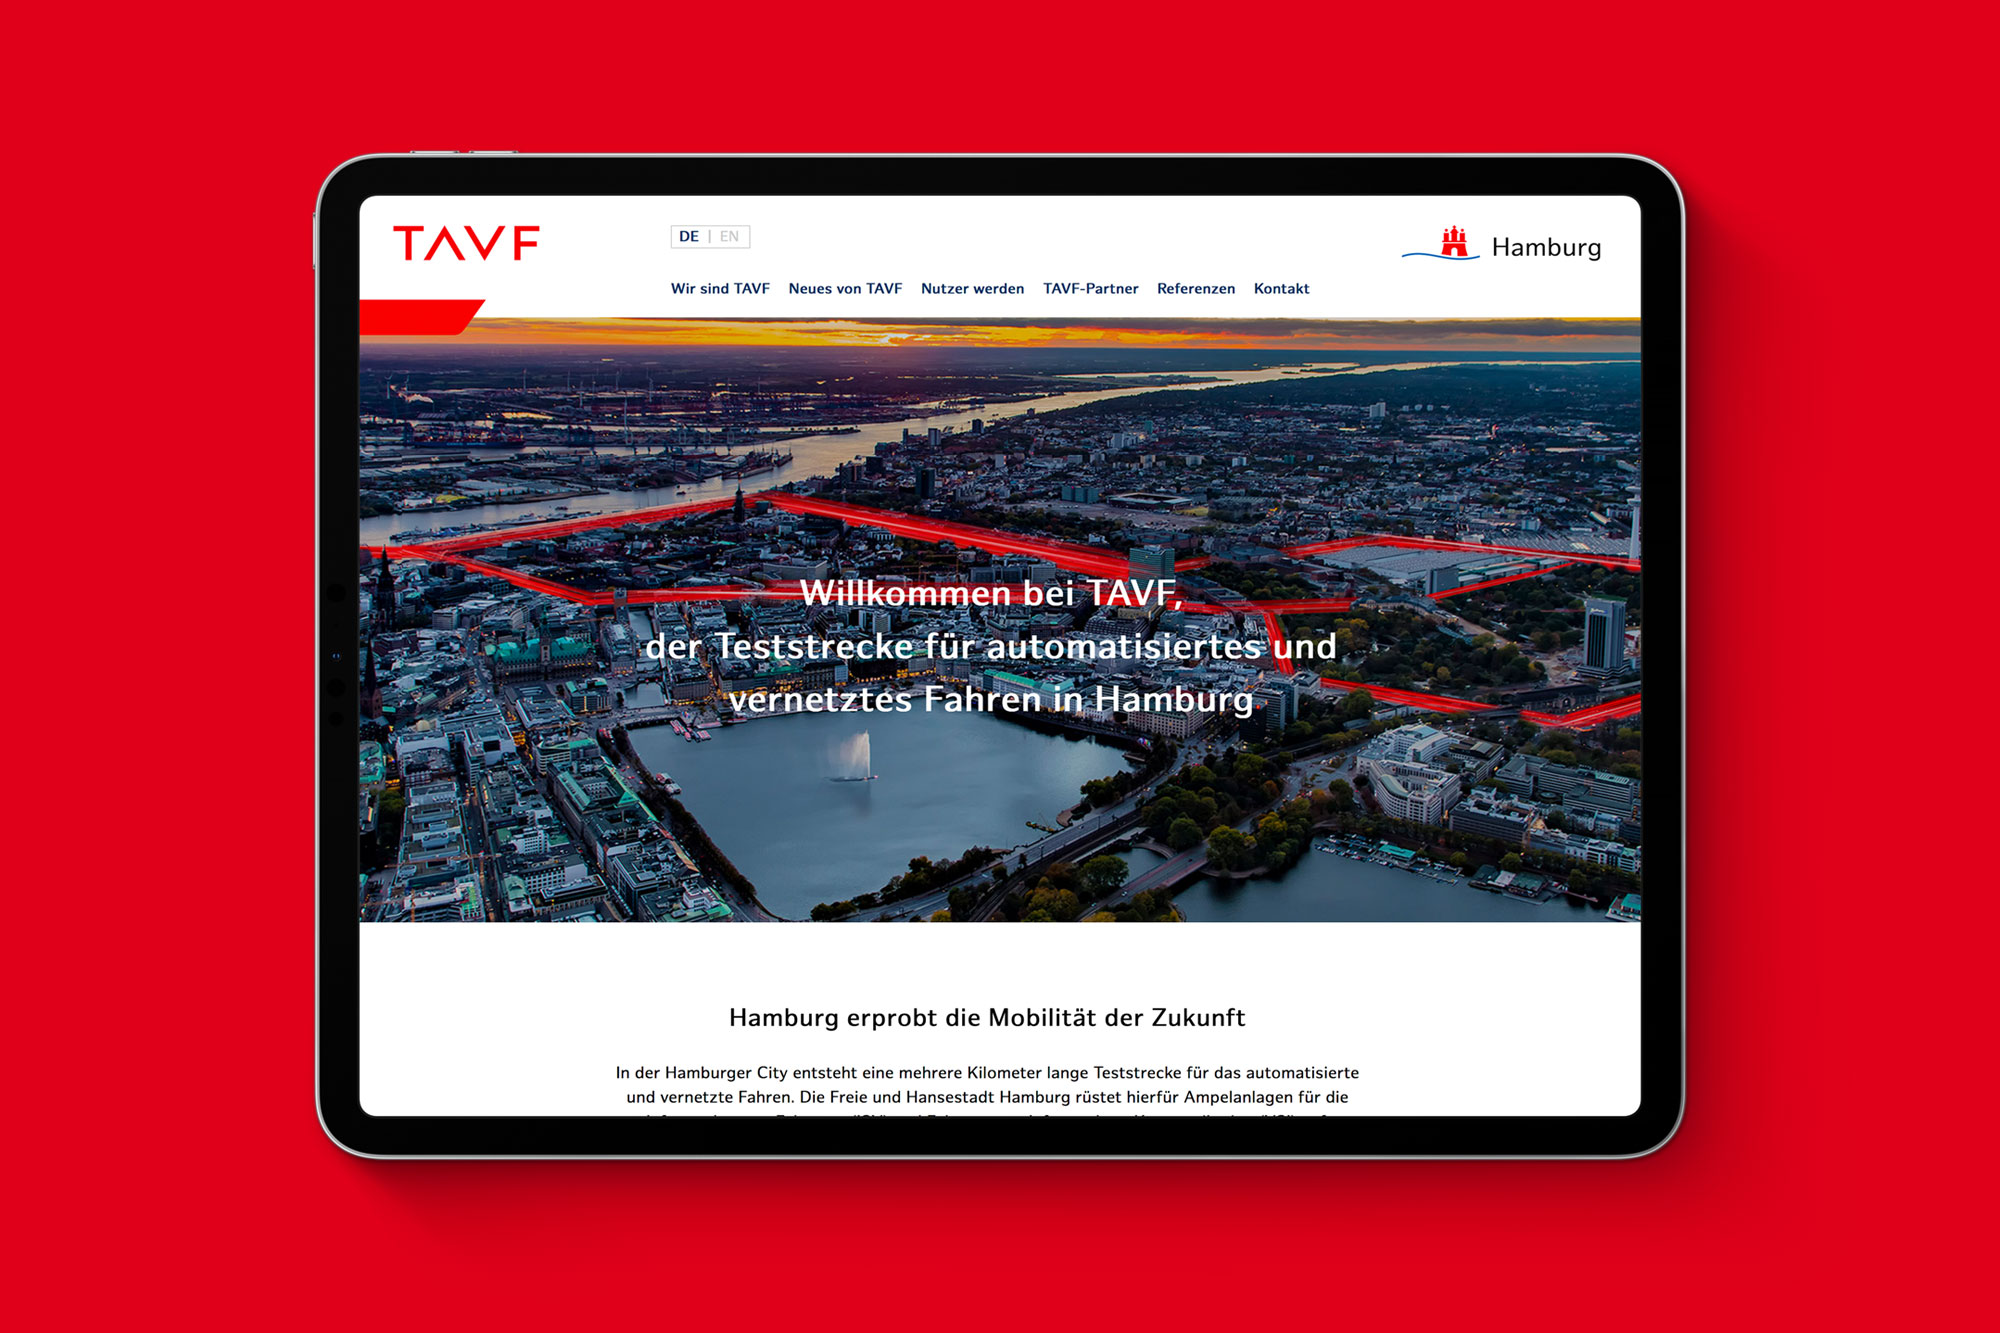 iPad on red background showing the website for TAVF - the test track for automated and connected driving in Hamburg.